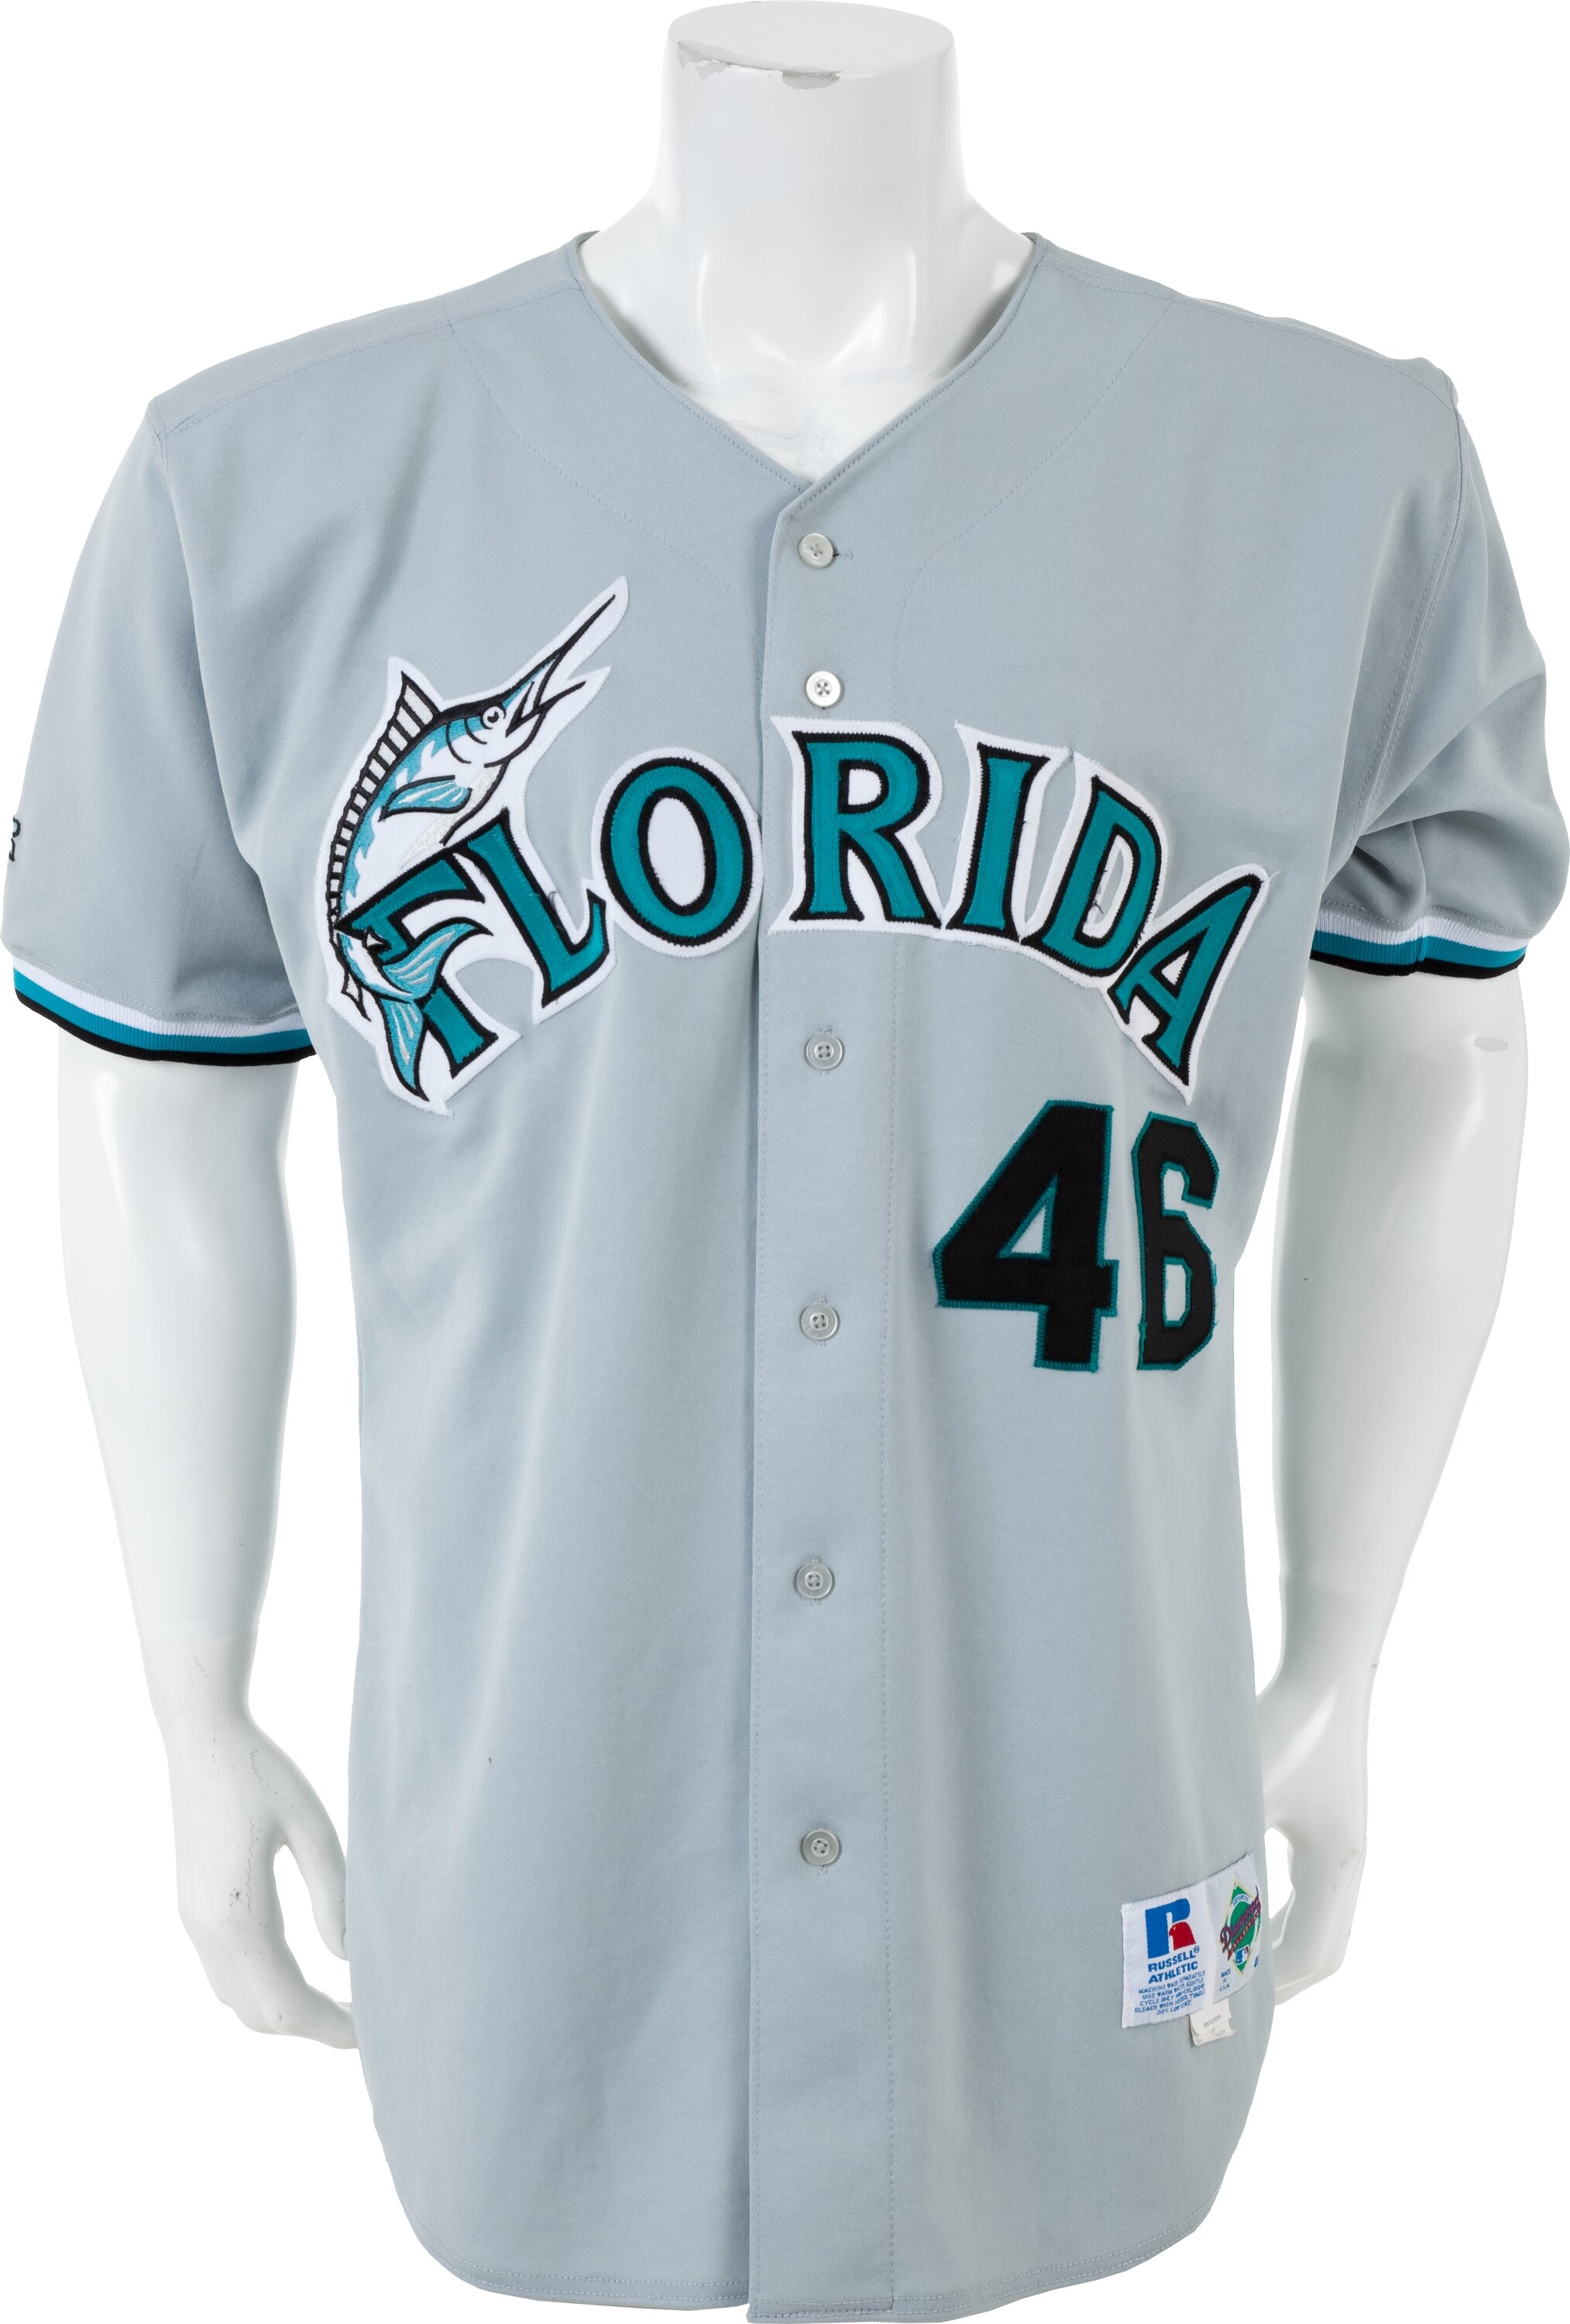 1994-02 Florida Marlins Blank Game Issued Blue Jersey BP ST 52 DP07489